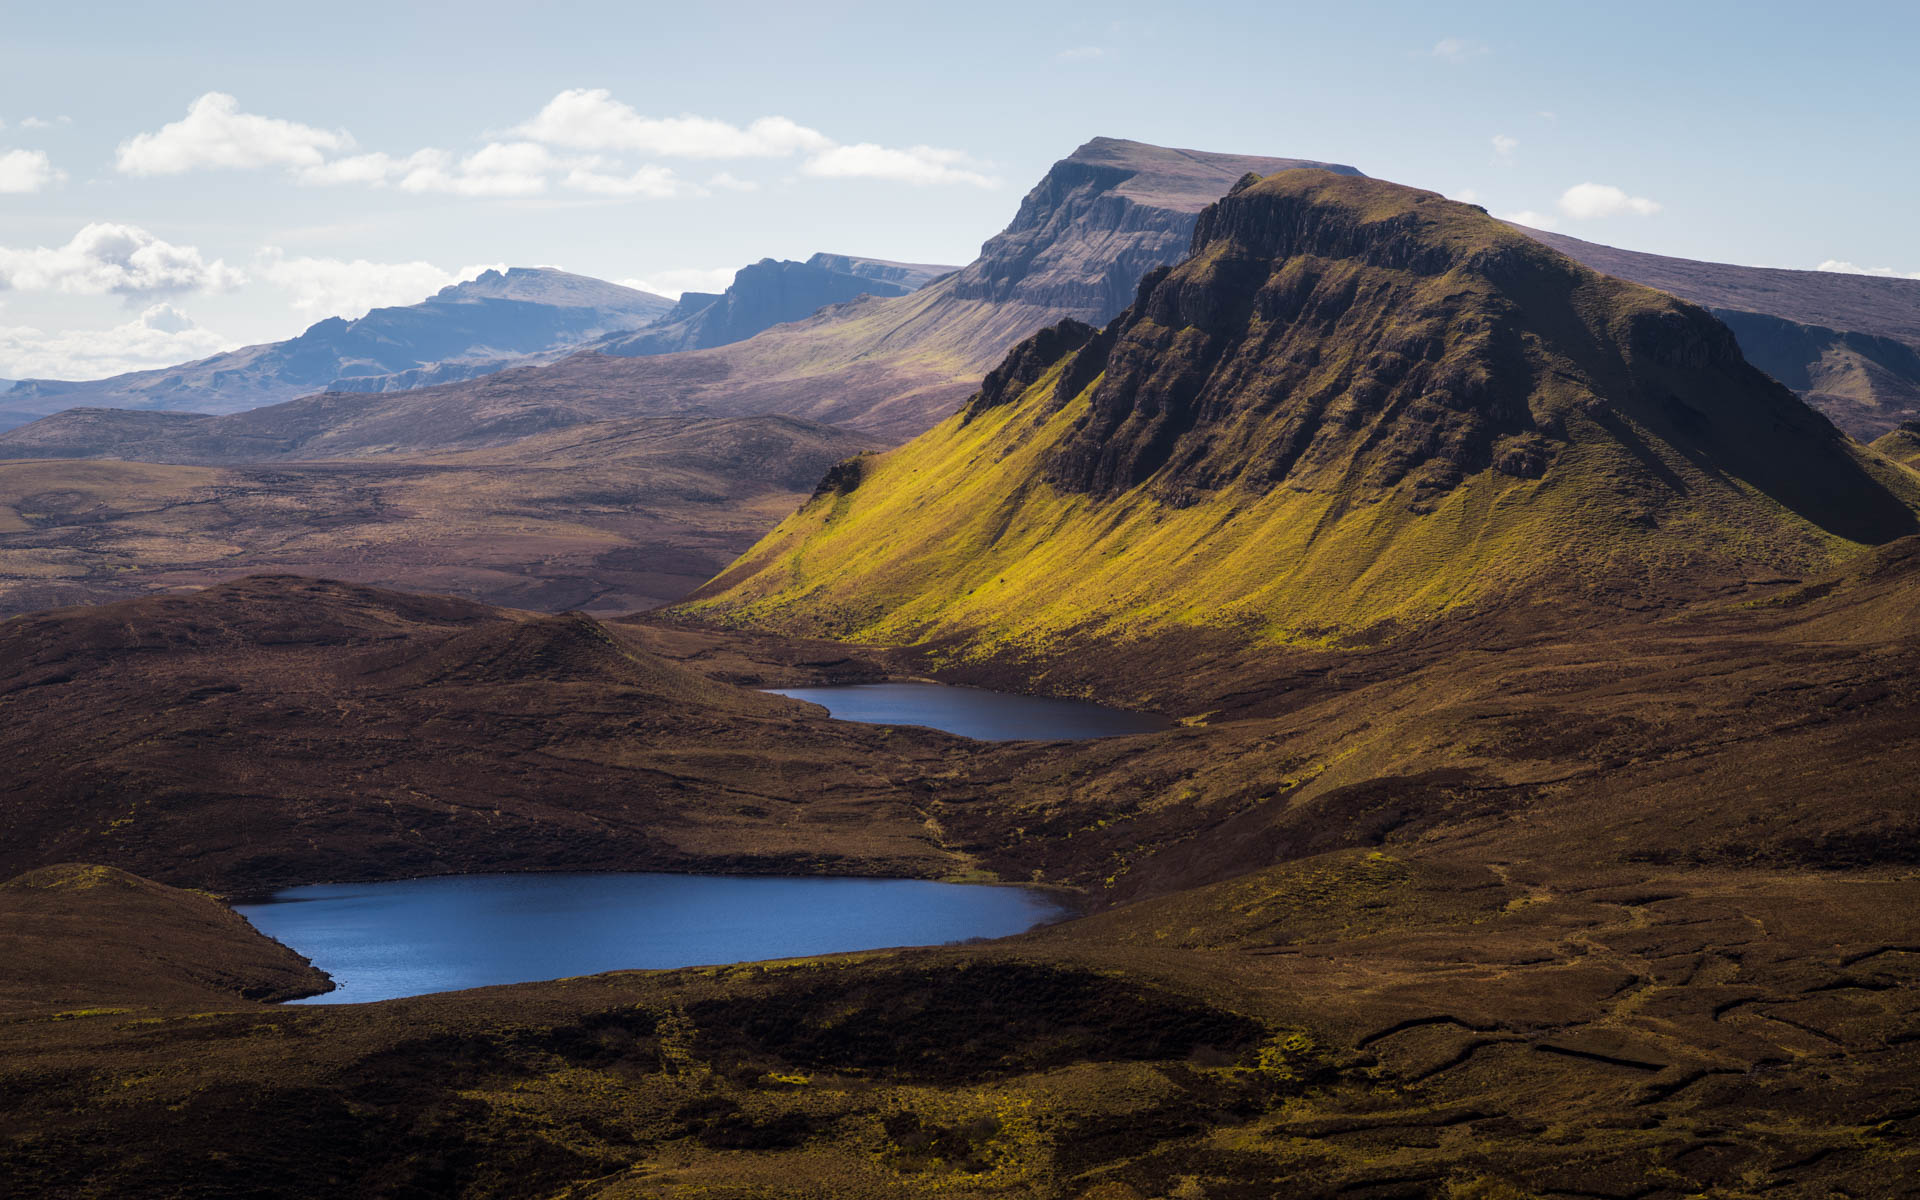 Blue Sky over the Quiraing Mountains - Isle of Skye Photo Spot